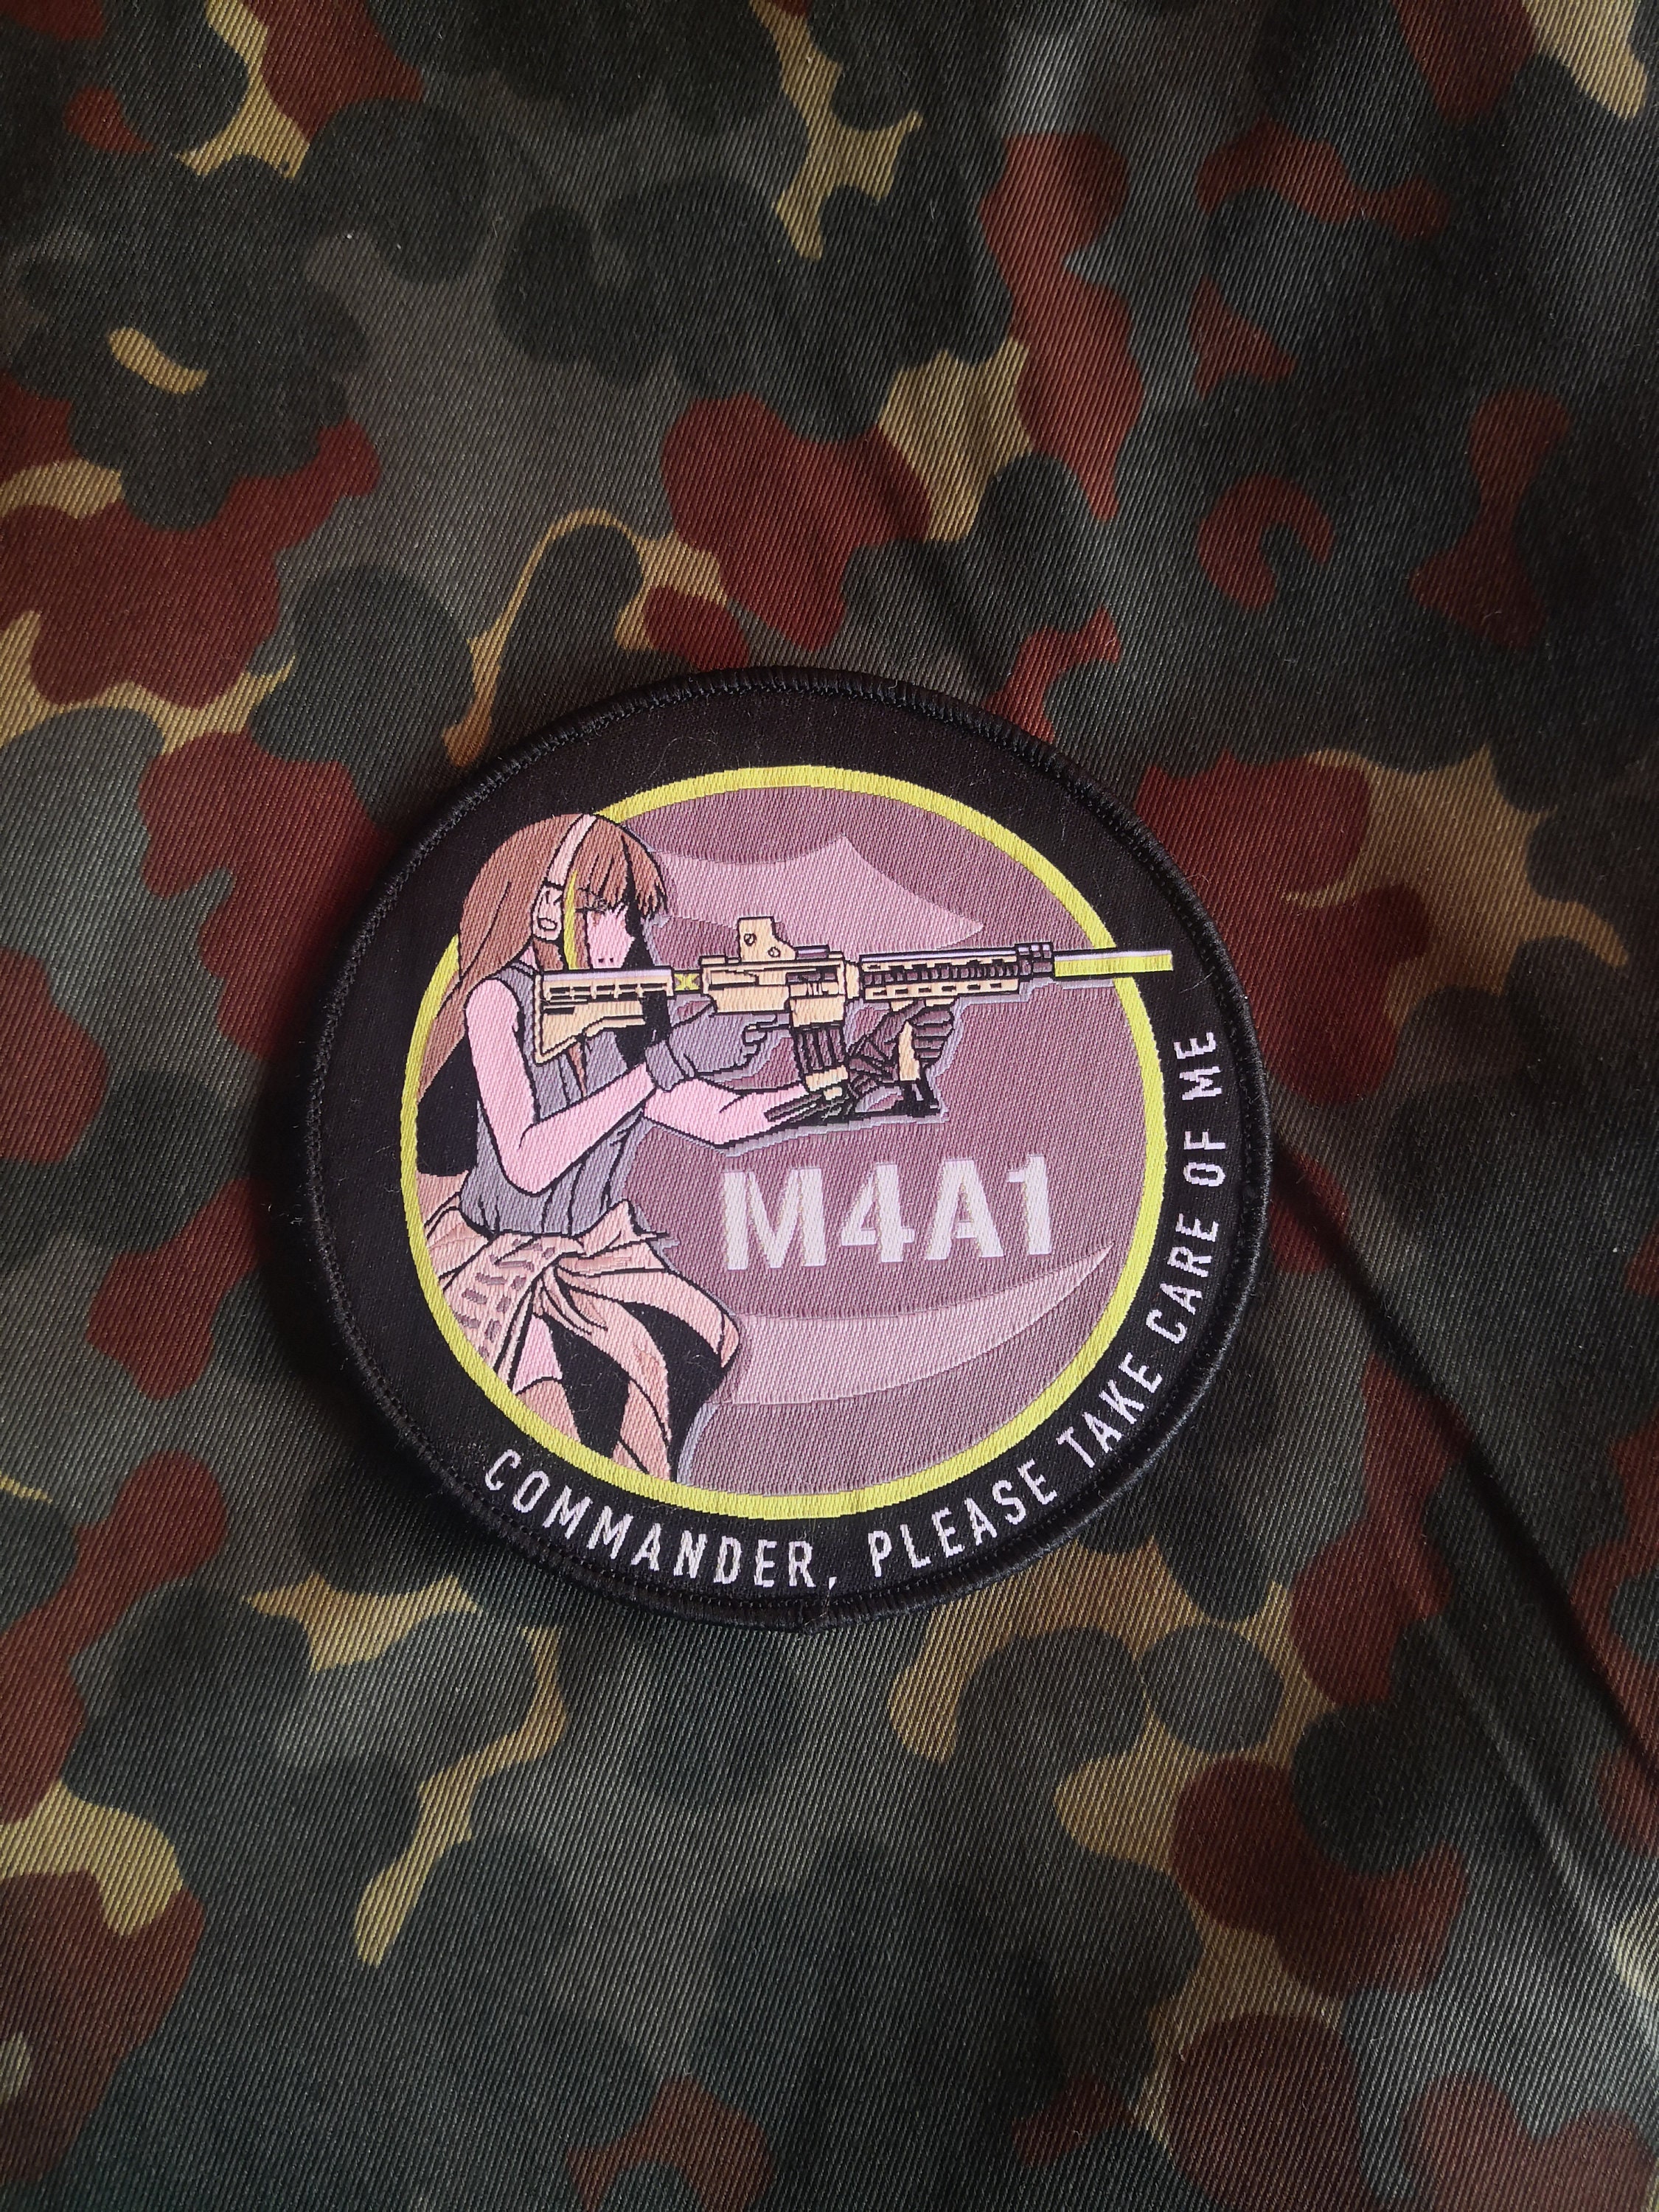 New Anime Girls Frontline UMP9 Actical Patch Embroidered Badge